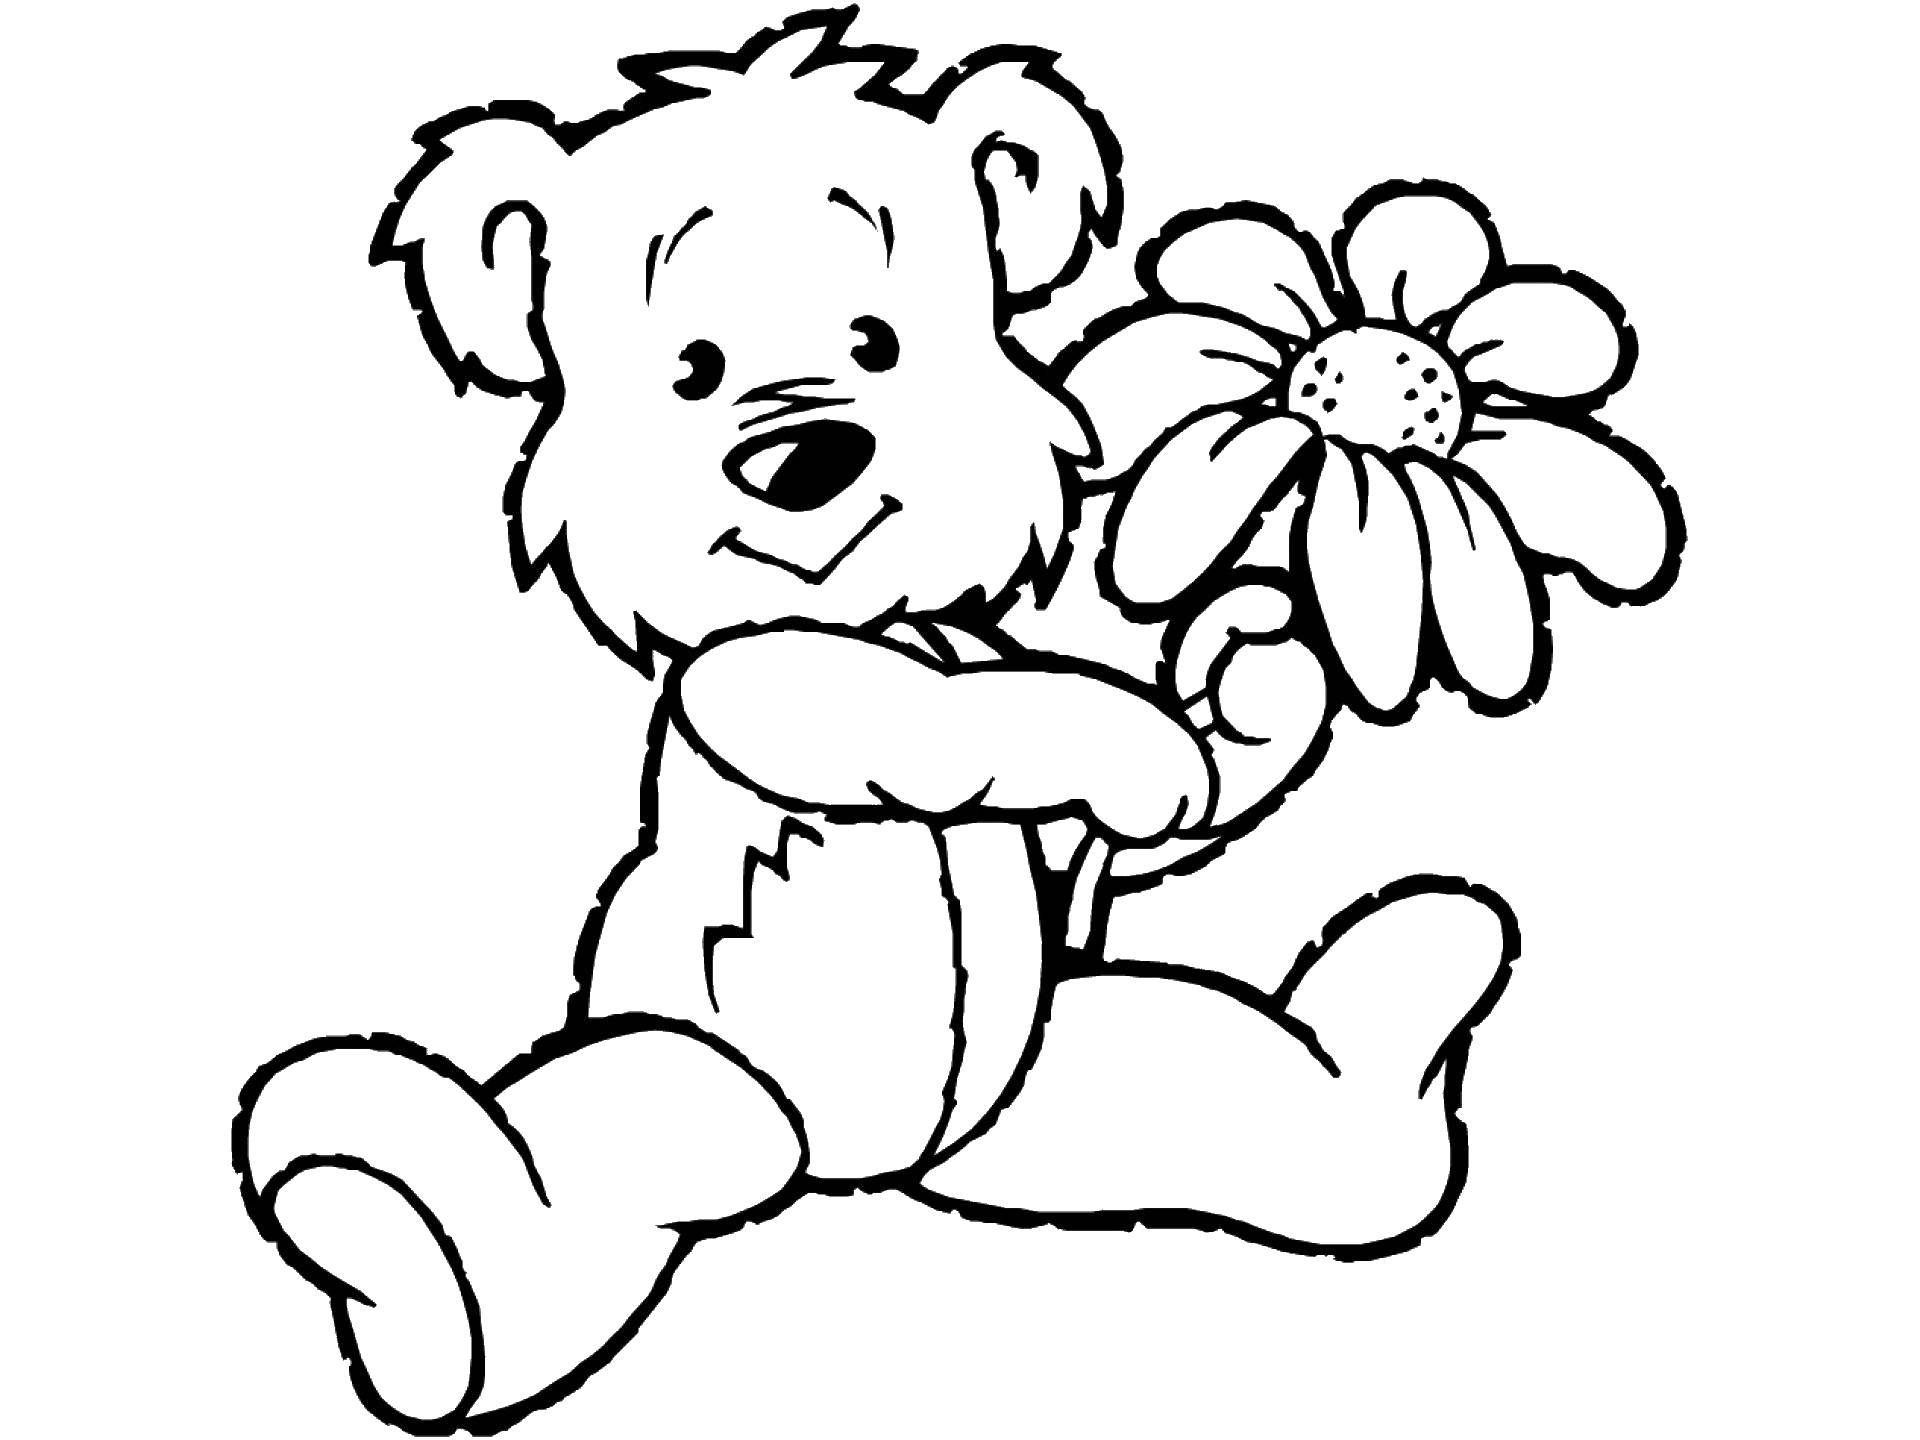 Coloring Teddy bear and flower. Category coloring. Tags:  bear, flower.